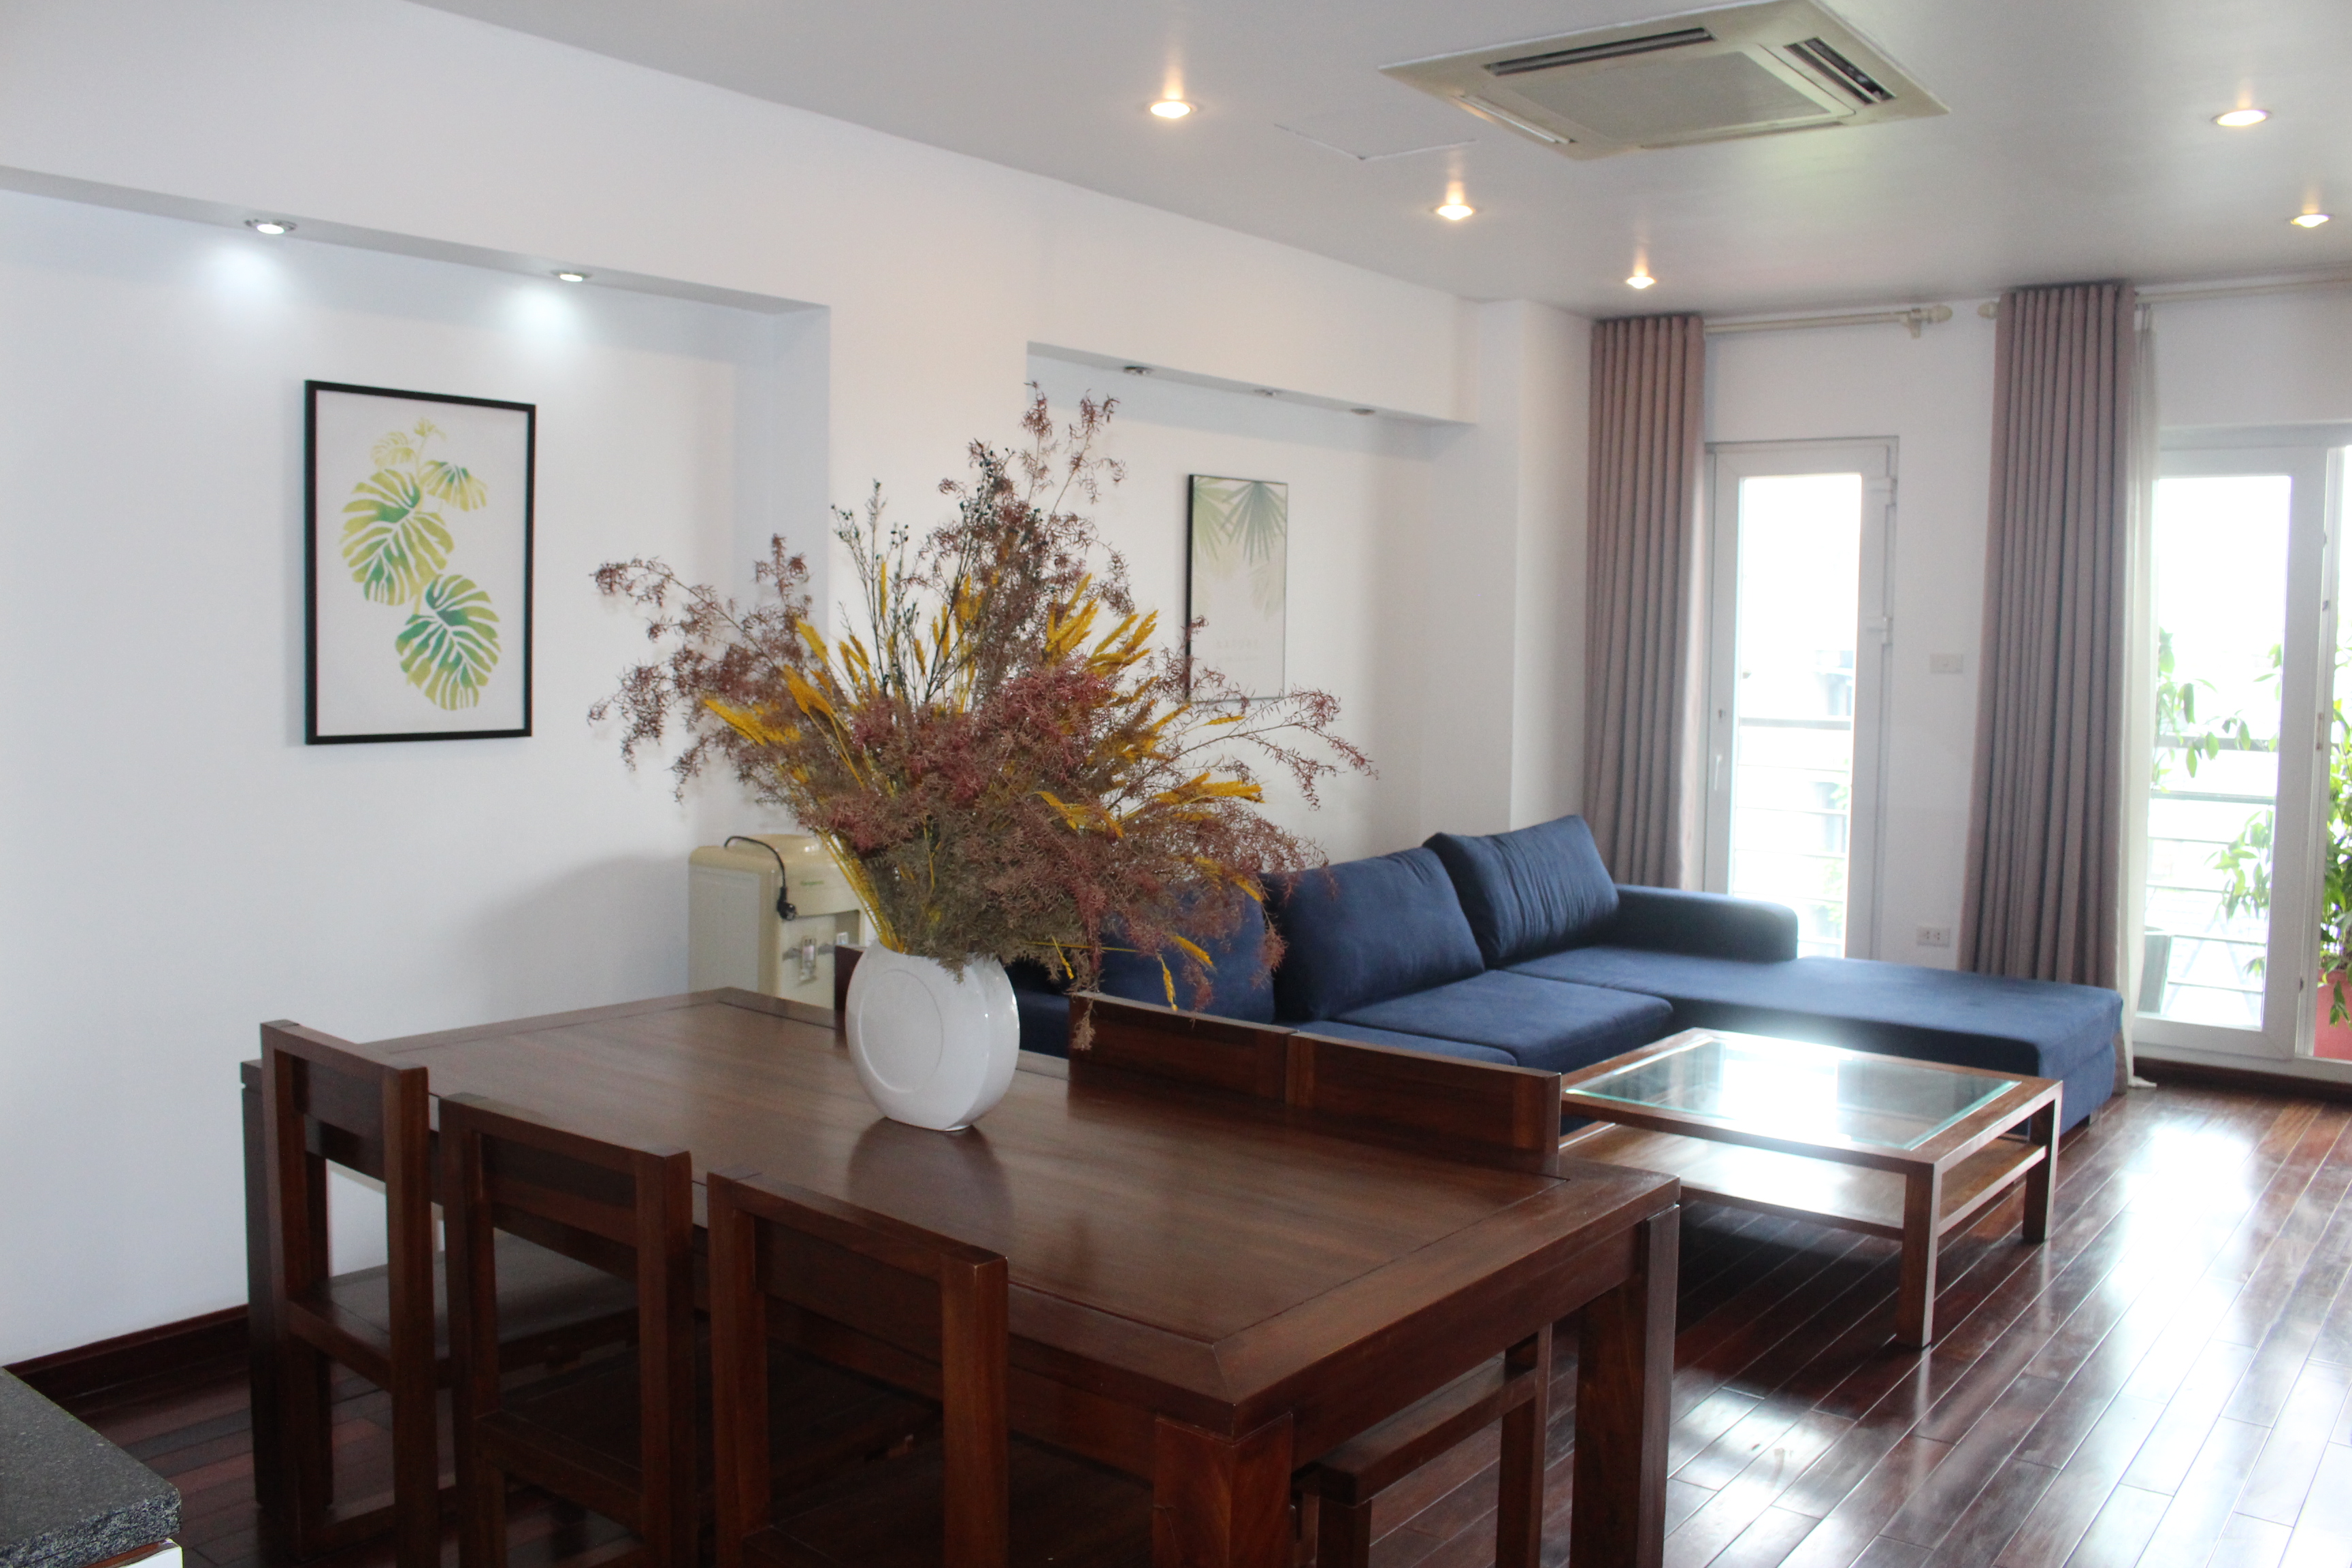 8F, 3 bedroom apartment available in Tay Ho street